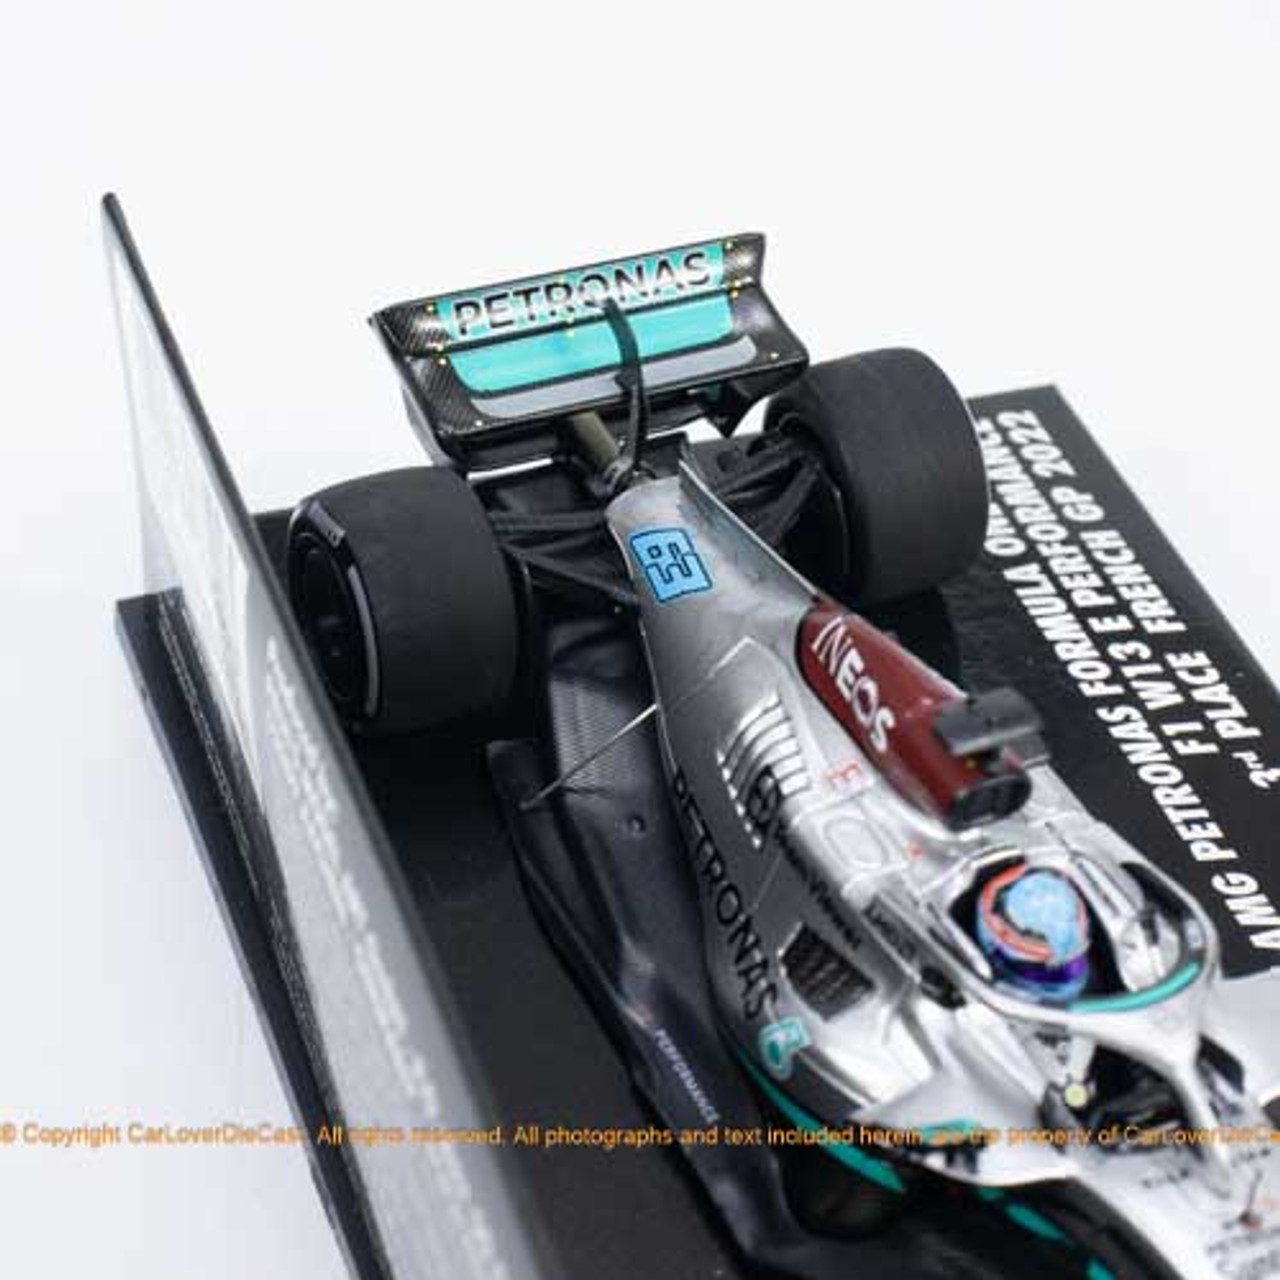 1/43 MINICHAMPS MERCEDES-AMG PETRONAS FORMULA ONE TEAM F1 W13 E PERFORMANCE - G. RUSSELL - 3RD PLACE FRENCH GP 2022 Resin Car Model